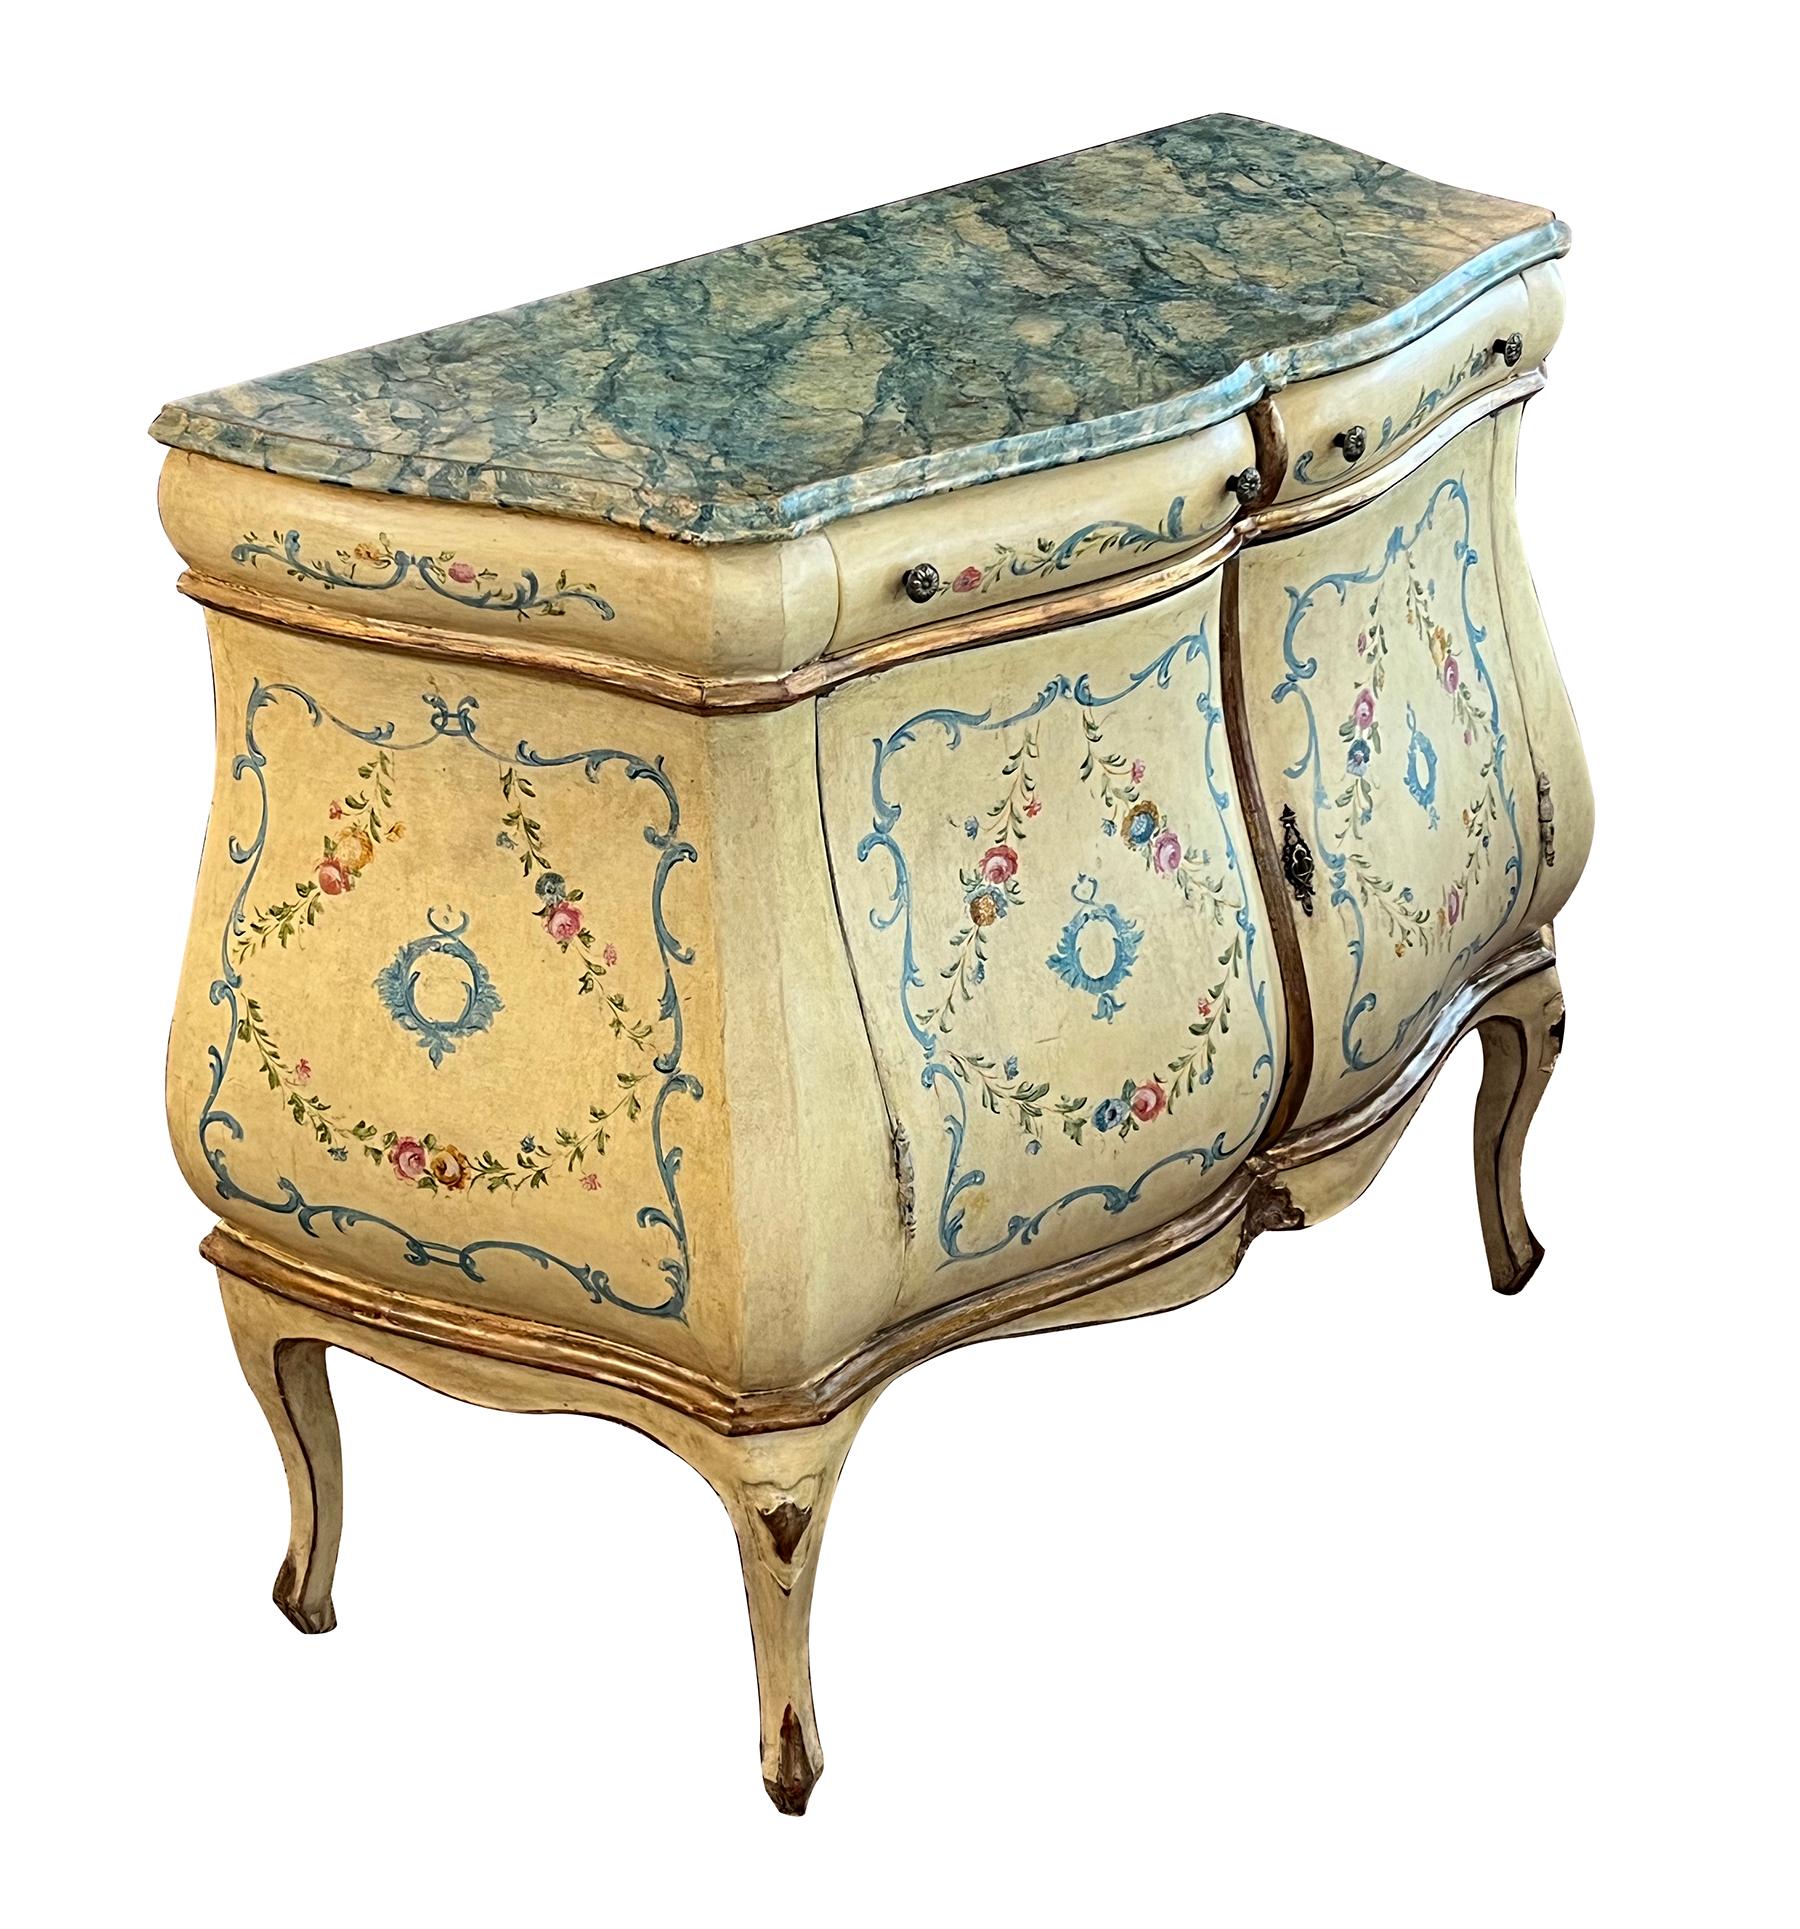 the shaped faux marble top above a bombe-form case fitted with 2 drawers over 2 doors all raised on cabriole legs; the whole painted with foliate vines and floral garlands on a muted butter-yellow ground